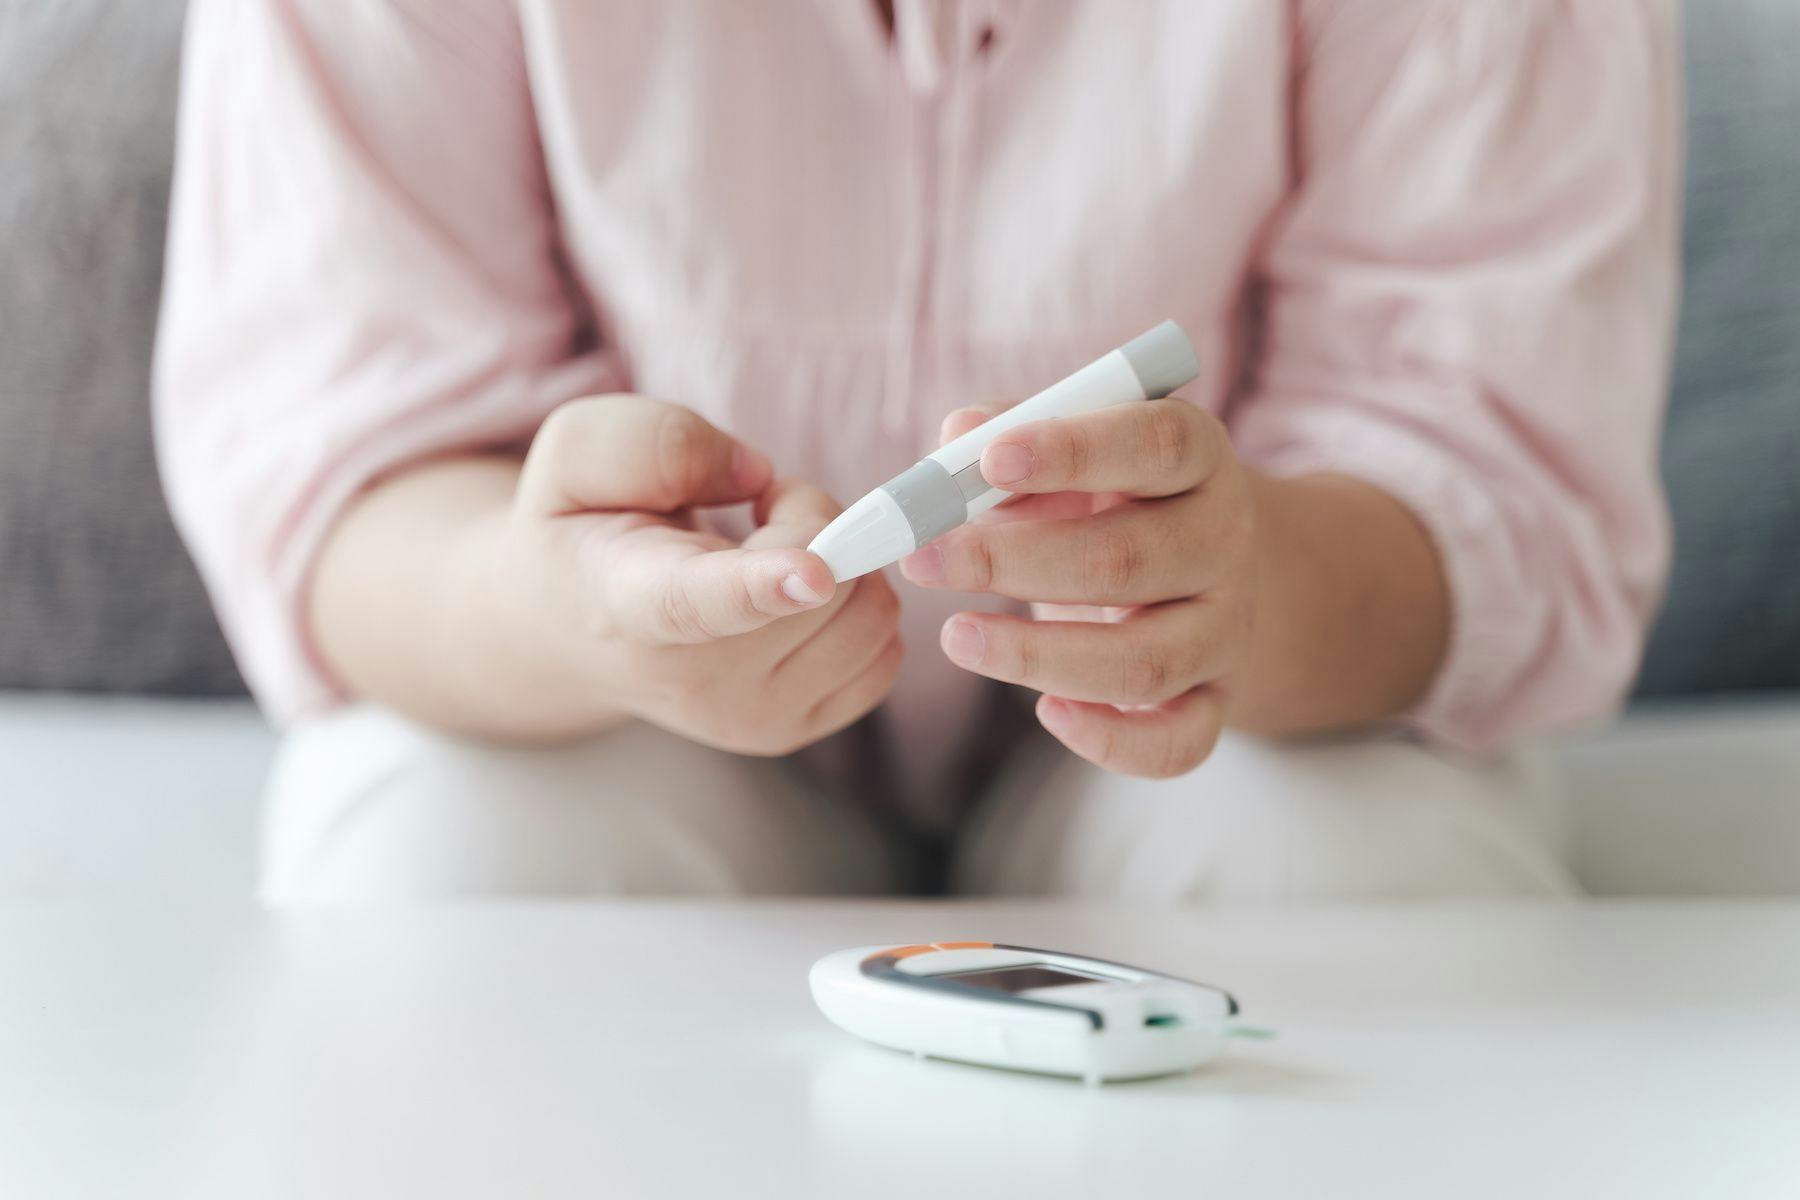 Increased Social Vulnerability Accounted for Decrease in Diabetes Control